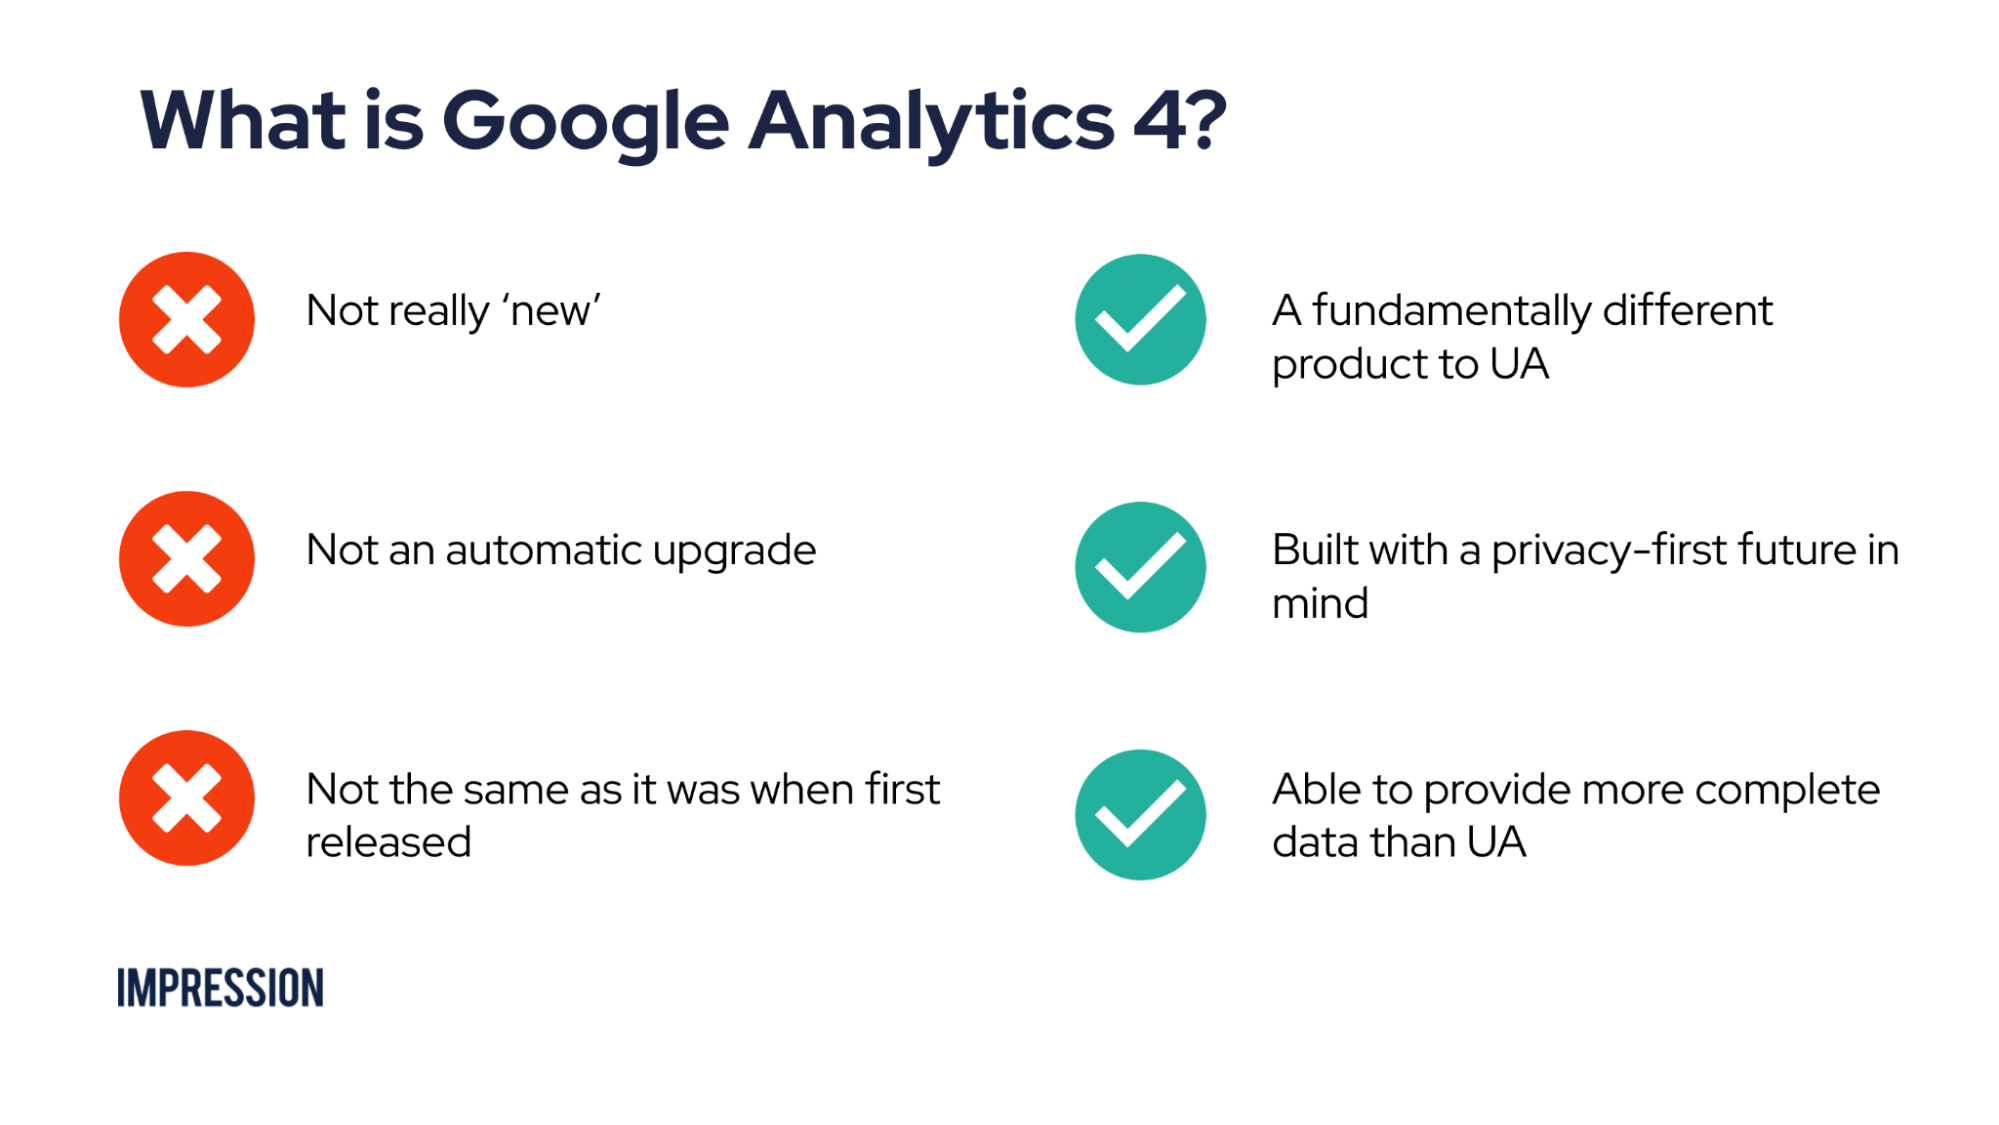 What is Google Analytics 4?
It's not really new.
It's not an automatic upgrade.
It's not the same as it was when first released.
It is a fundamentally different product to UA.
It is built with a privacy-first future in mind.
It is able to provide more complete data than UA.